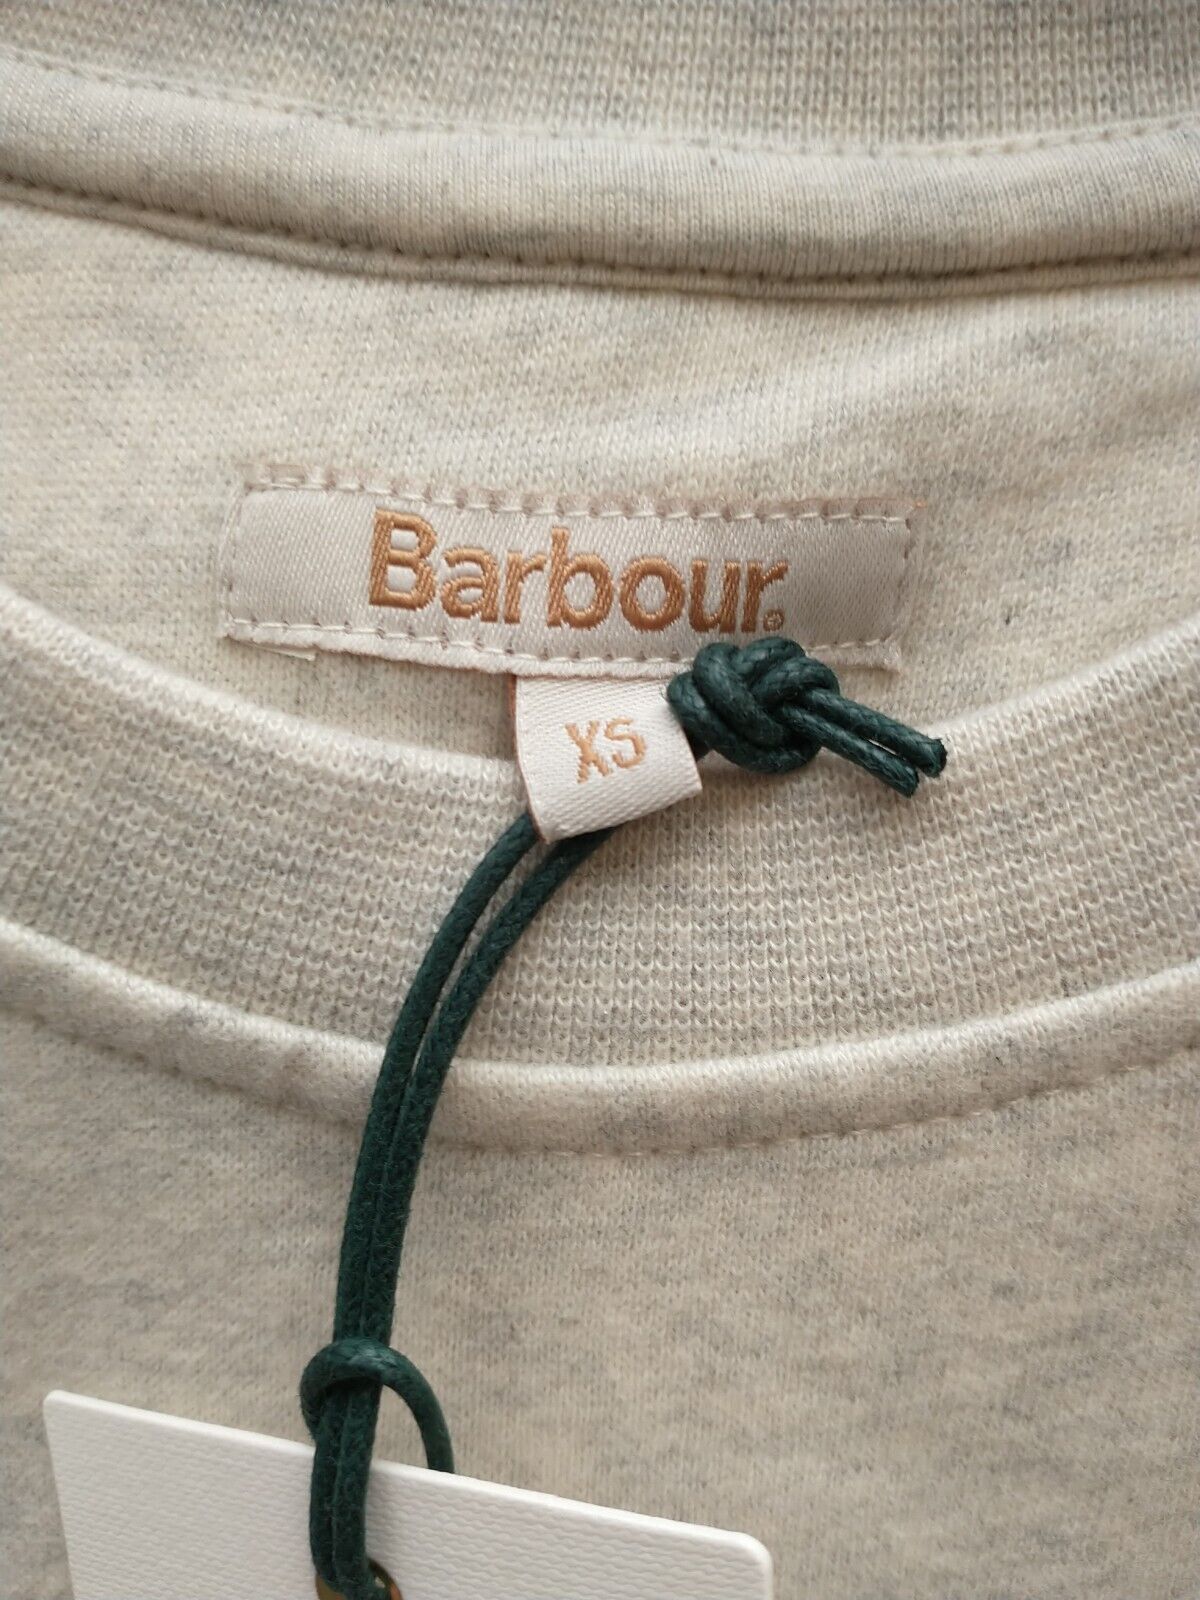 Barbour Rosie Relaxed Lounge Crew - Ecru Marl Size XS.